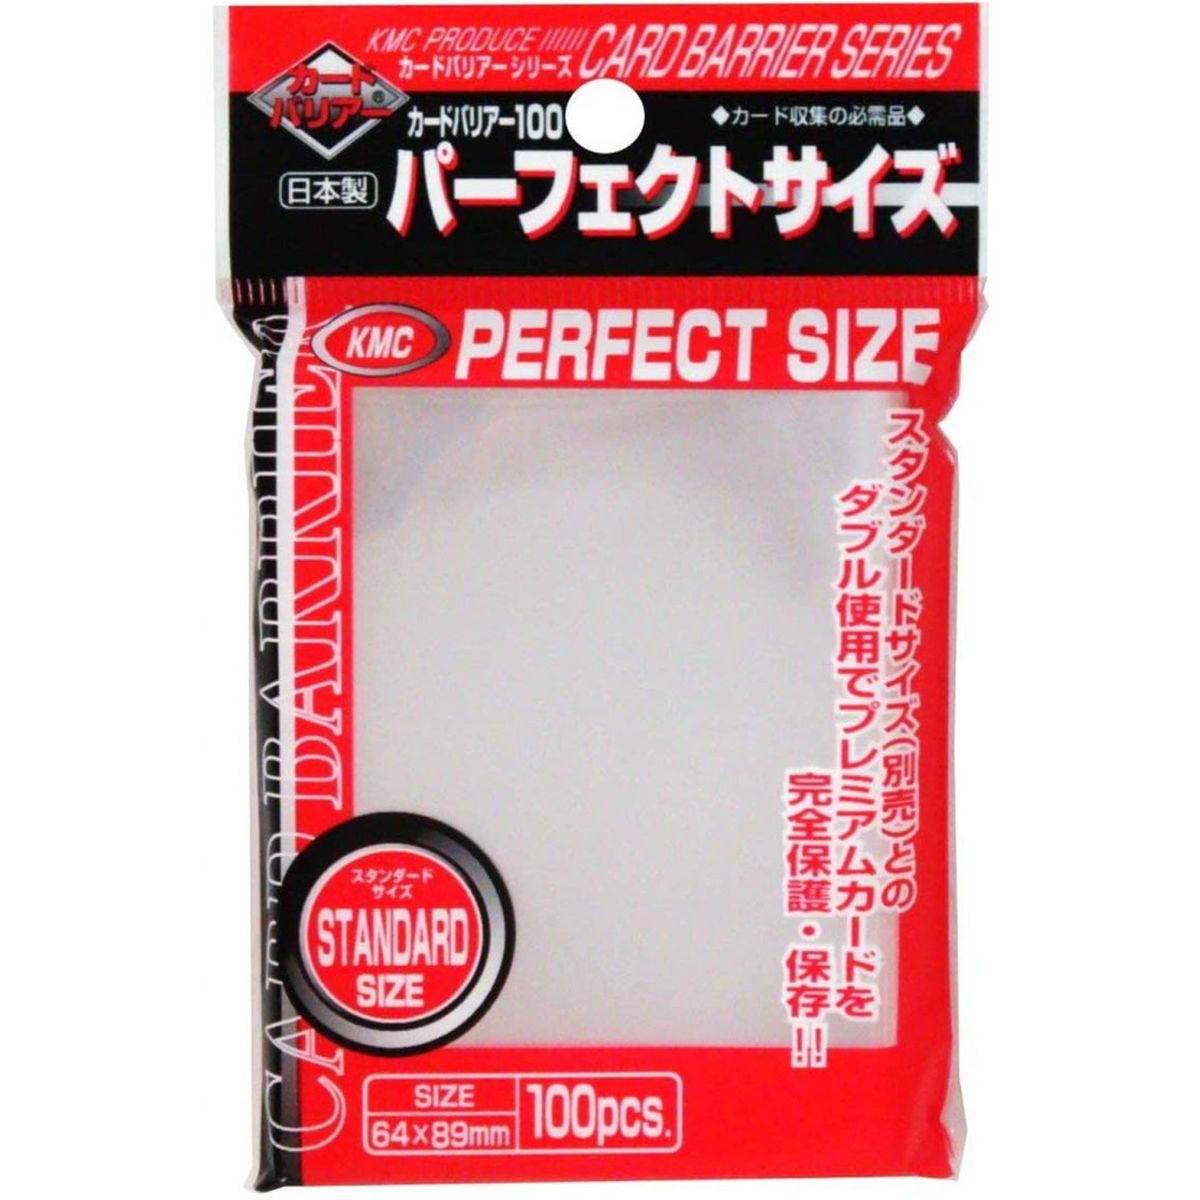 Item KMC - Card Sleeves - Standard - Perfect Size (100)